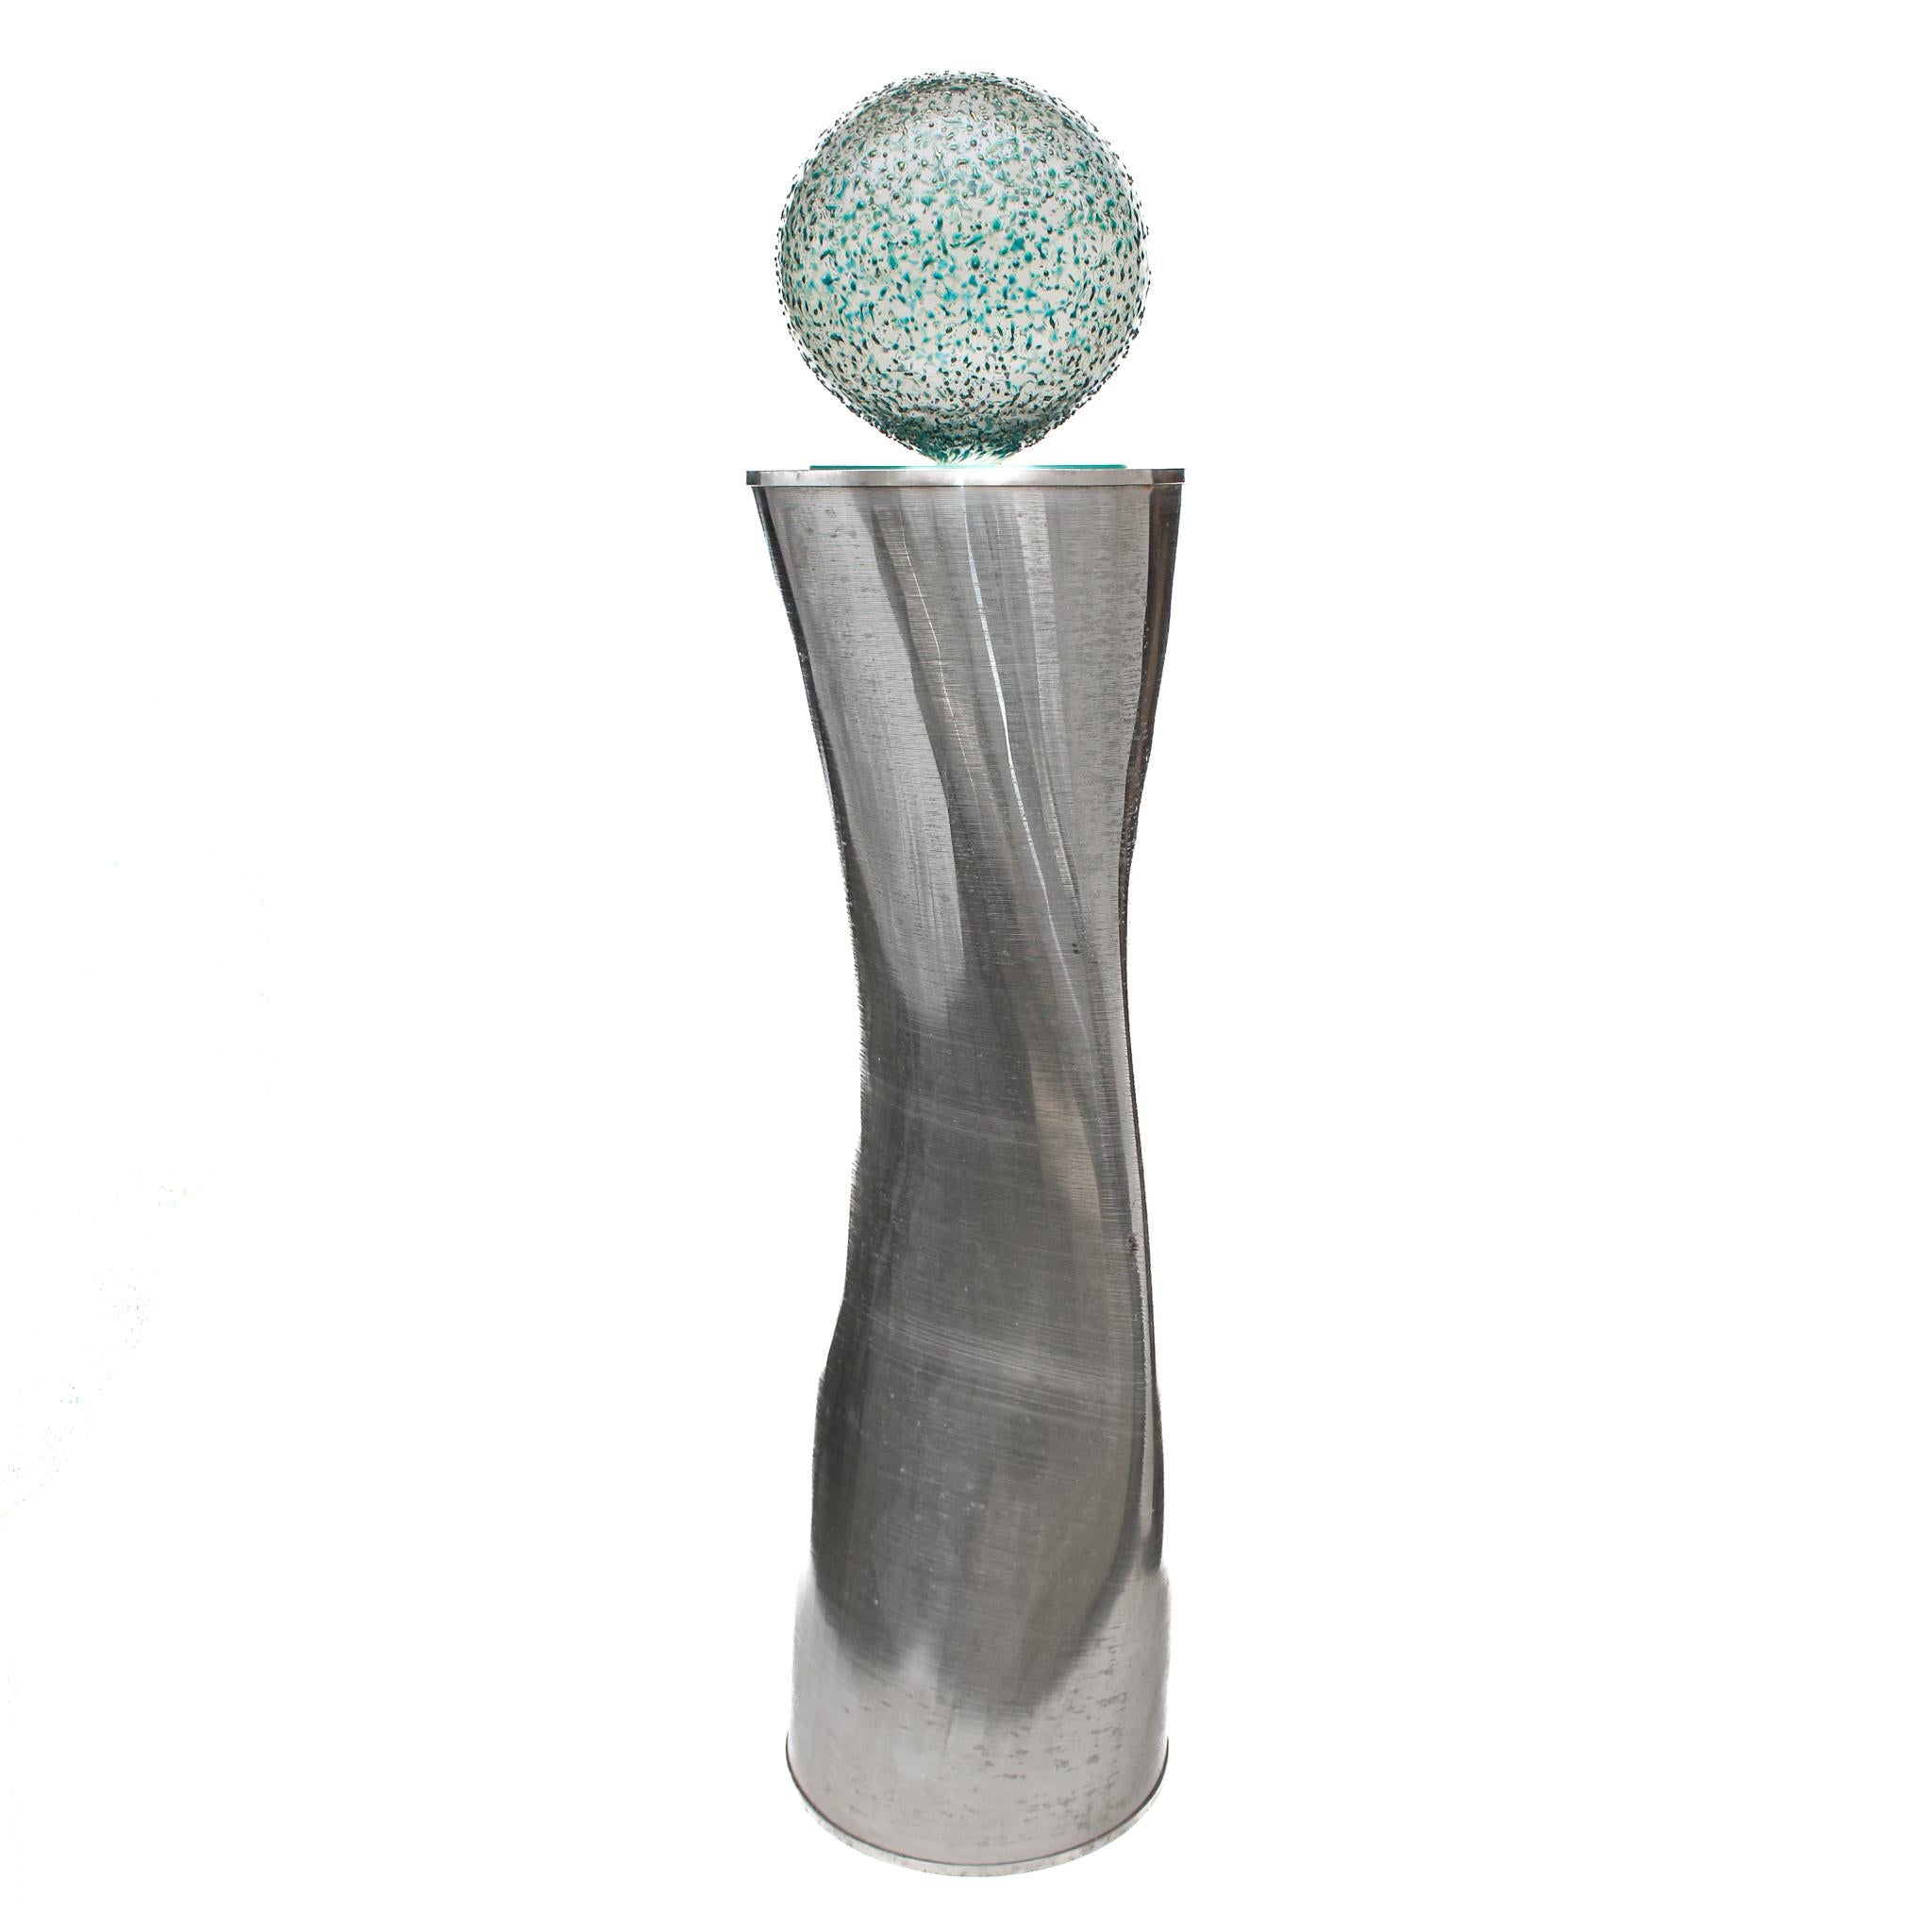 Sculptural industrial silver aluminum filter with a hand-blown glass ball top.

The sculptural piece is created from an aluminum filter with a hand-blown glass ball mounted on top. The glass ball has a flat bottom so it sits firmly on the aluminum